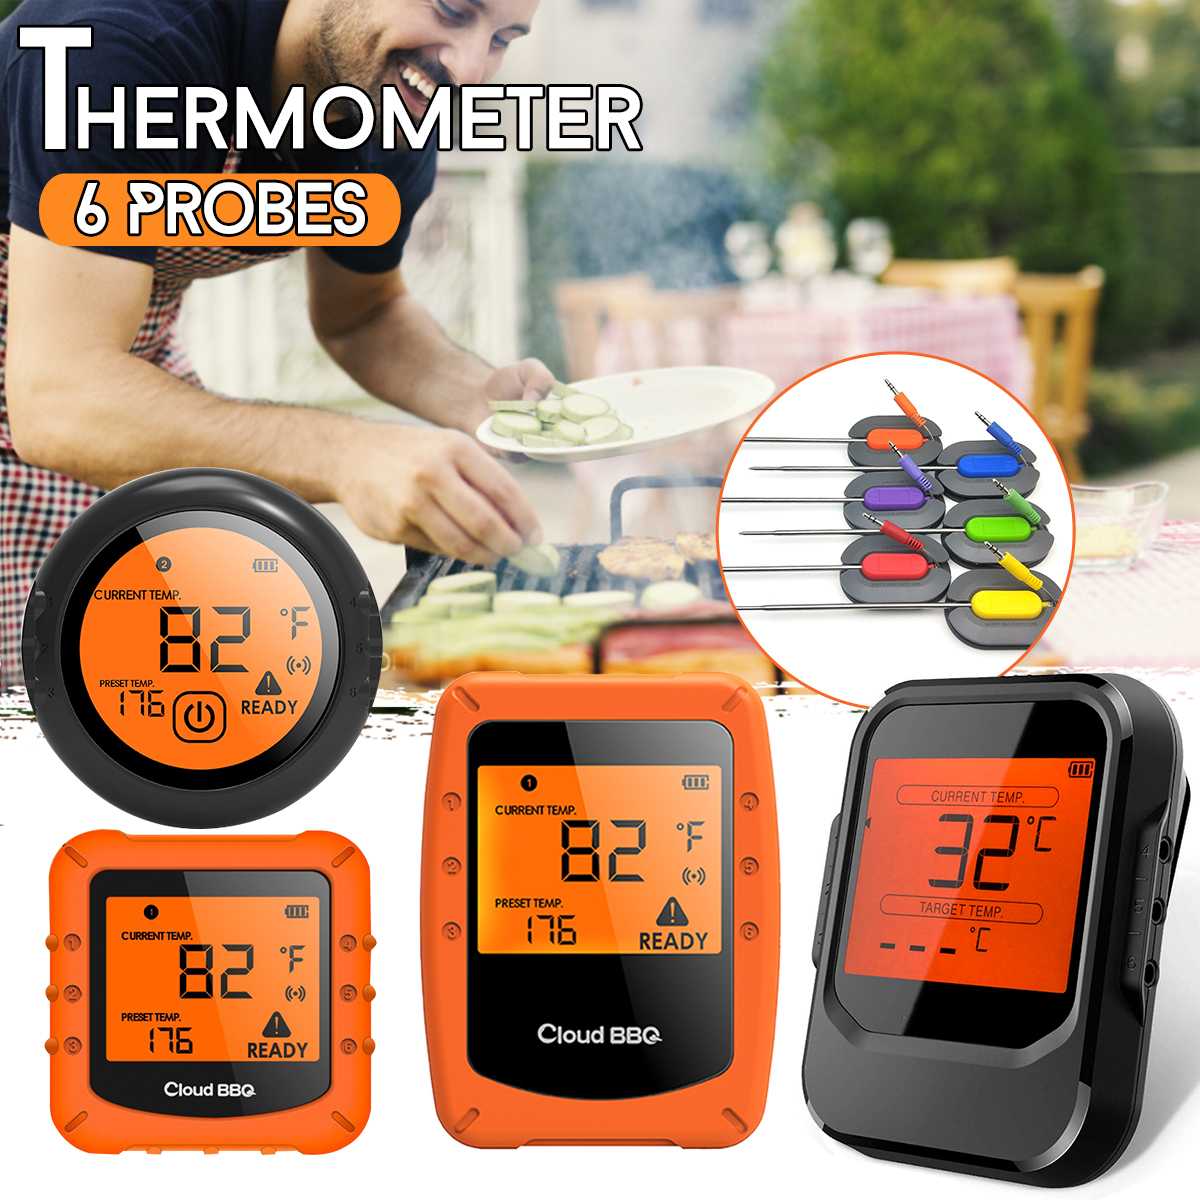 Digitale Draadloze bluetooth 4.0 BBQ Thermometer Met 6 Probes bluetooth Controle Voedsel Koken Timer Oven Vlees Grill Keuken Tool